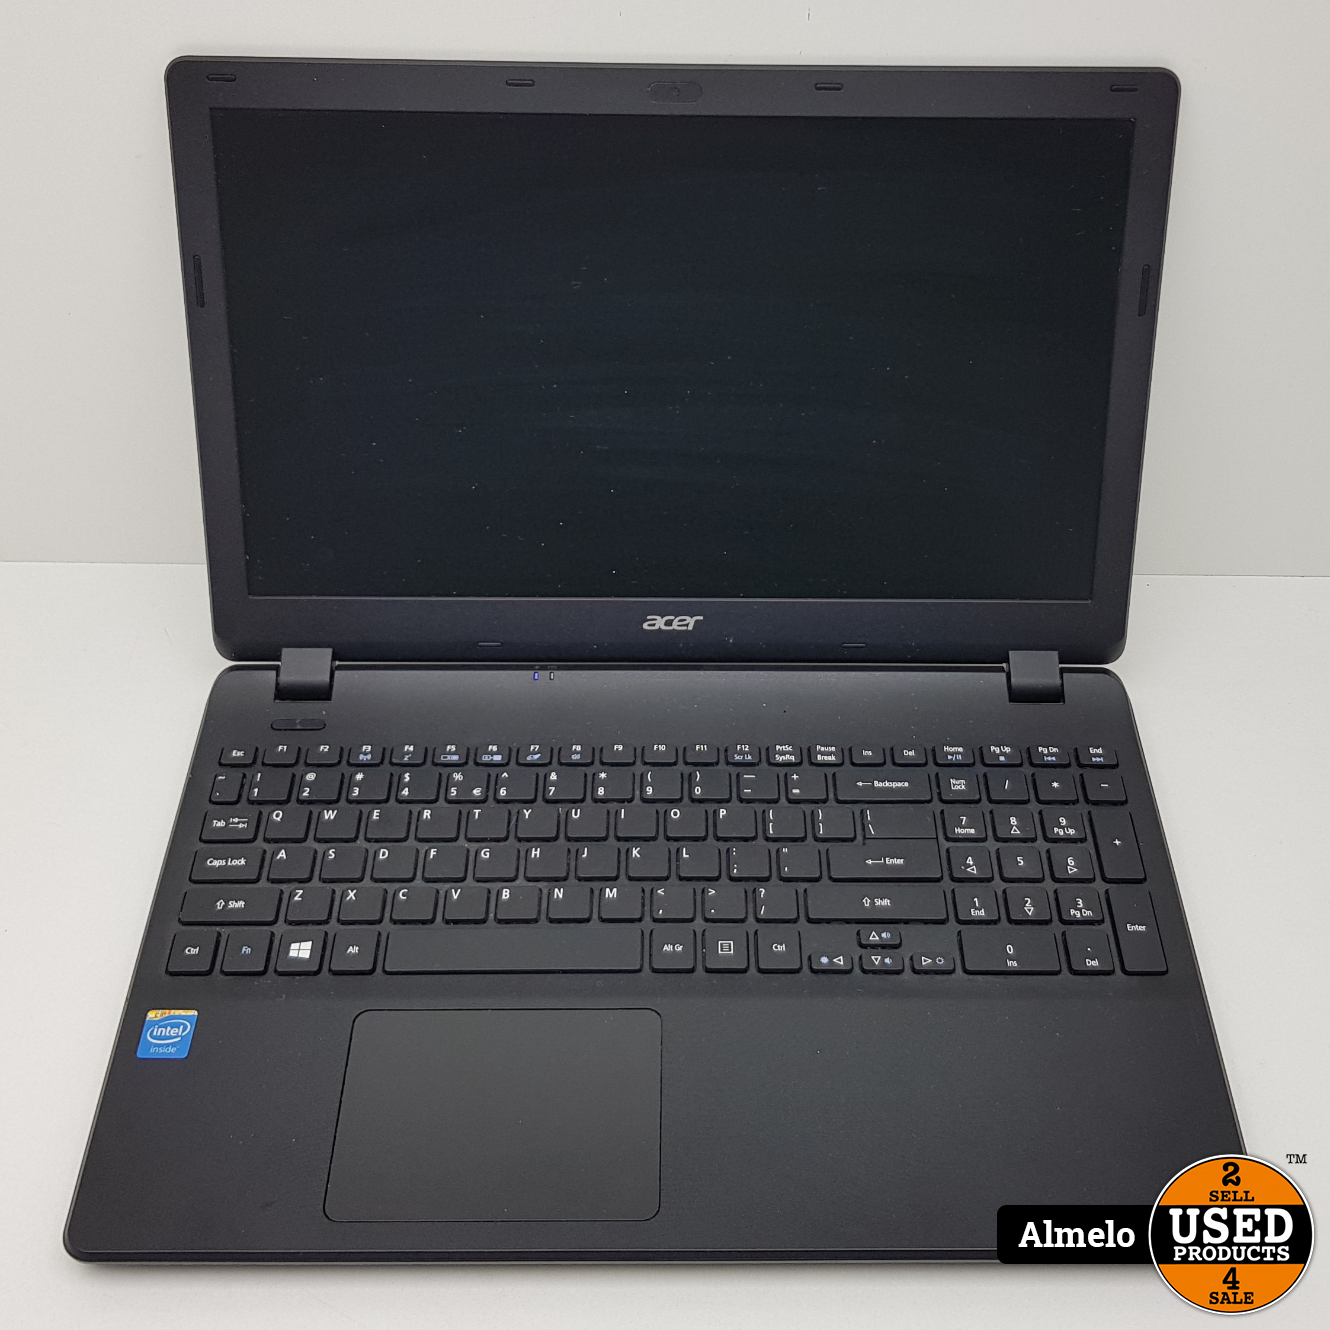 Nacht tafereel afschaffen acer Acer ES1-512 Laptop - Used Products Almelo